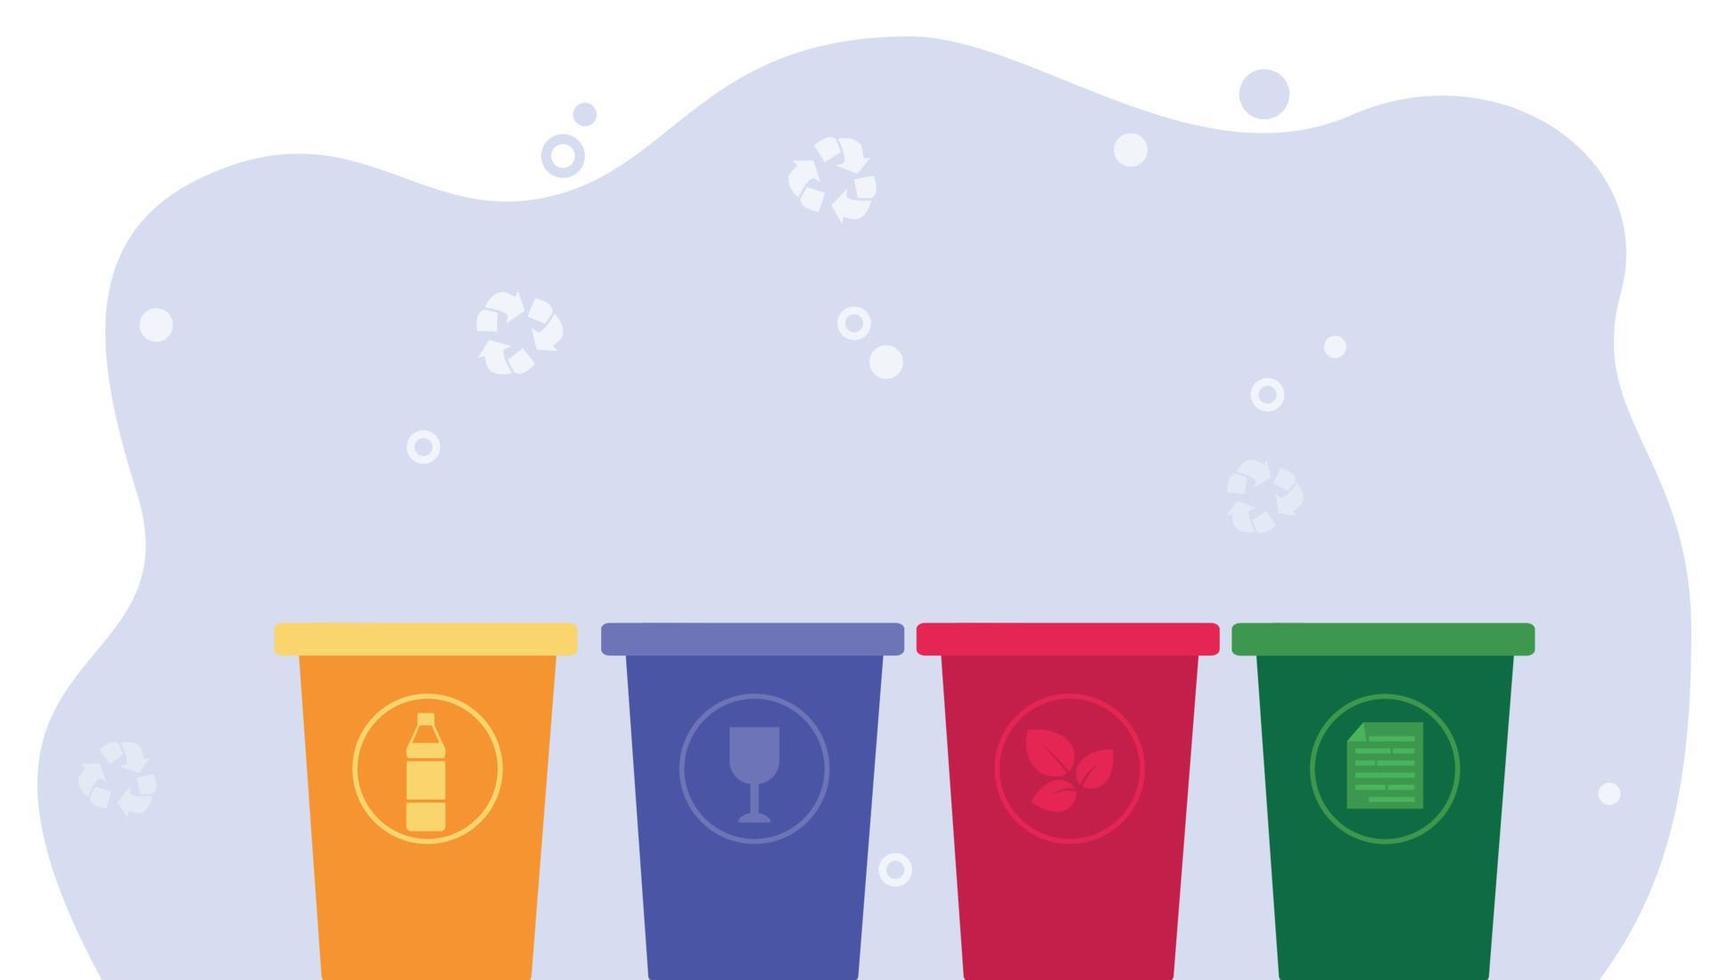 Waste sorting concept. Happy people putting plastic, glass, bio and paper garbage into different dumpsters. Vector illustration for environment protection and recycling topics